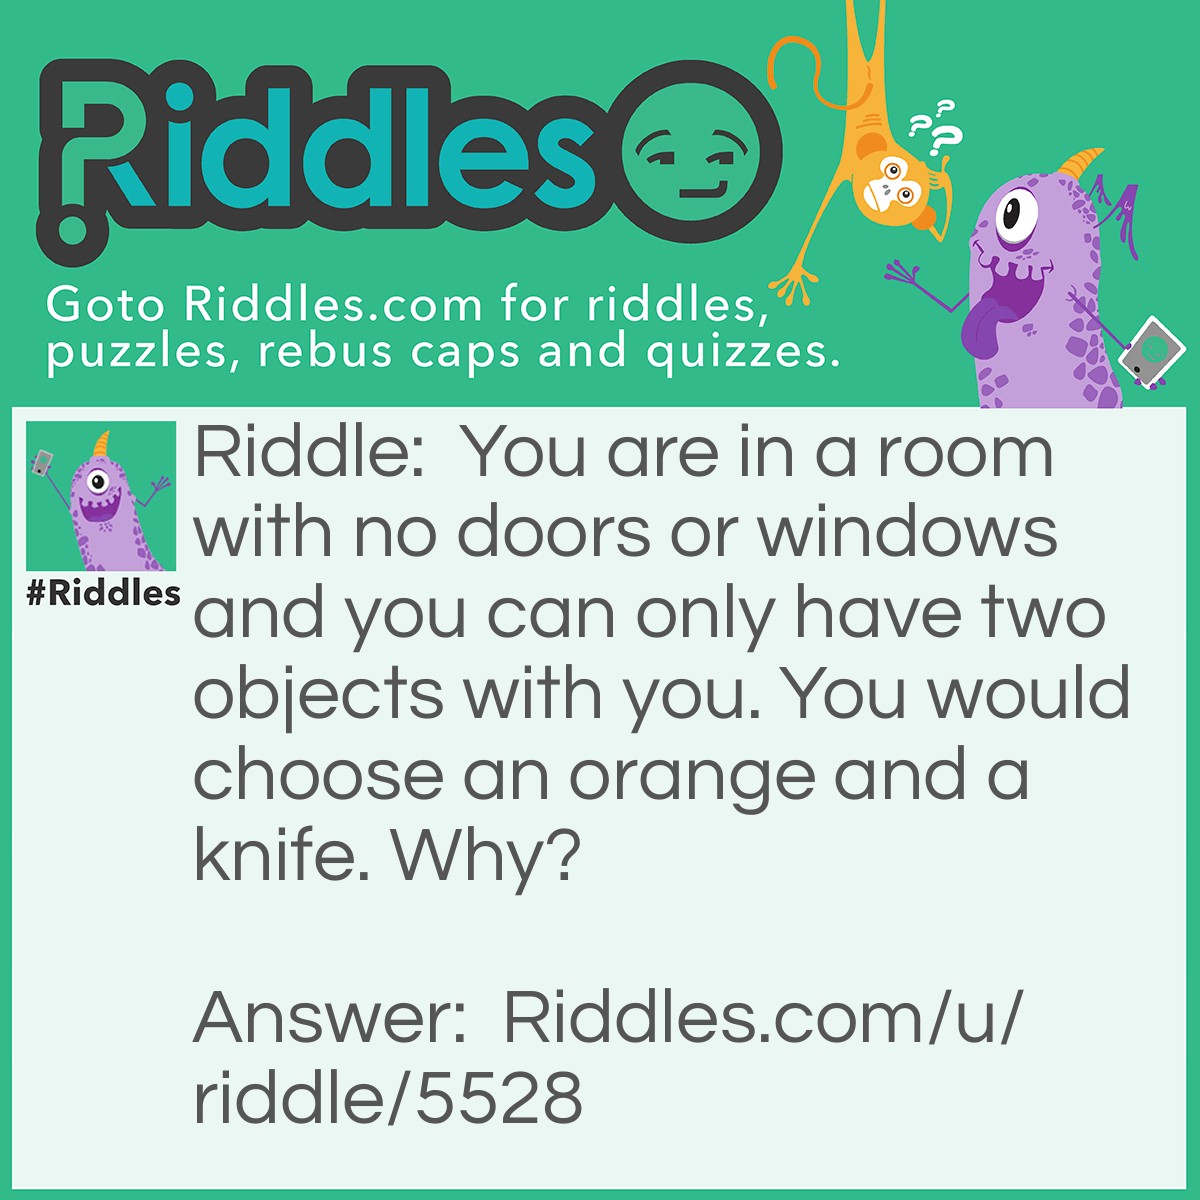 Riddle: You are in a room with no doors or windows and you can only have two objects with you. You would choose an orange and a knife. Why? Answer: Cut the knife in halves. Two halves make a hole. Escape out the hole.